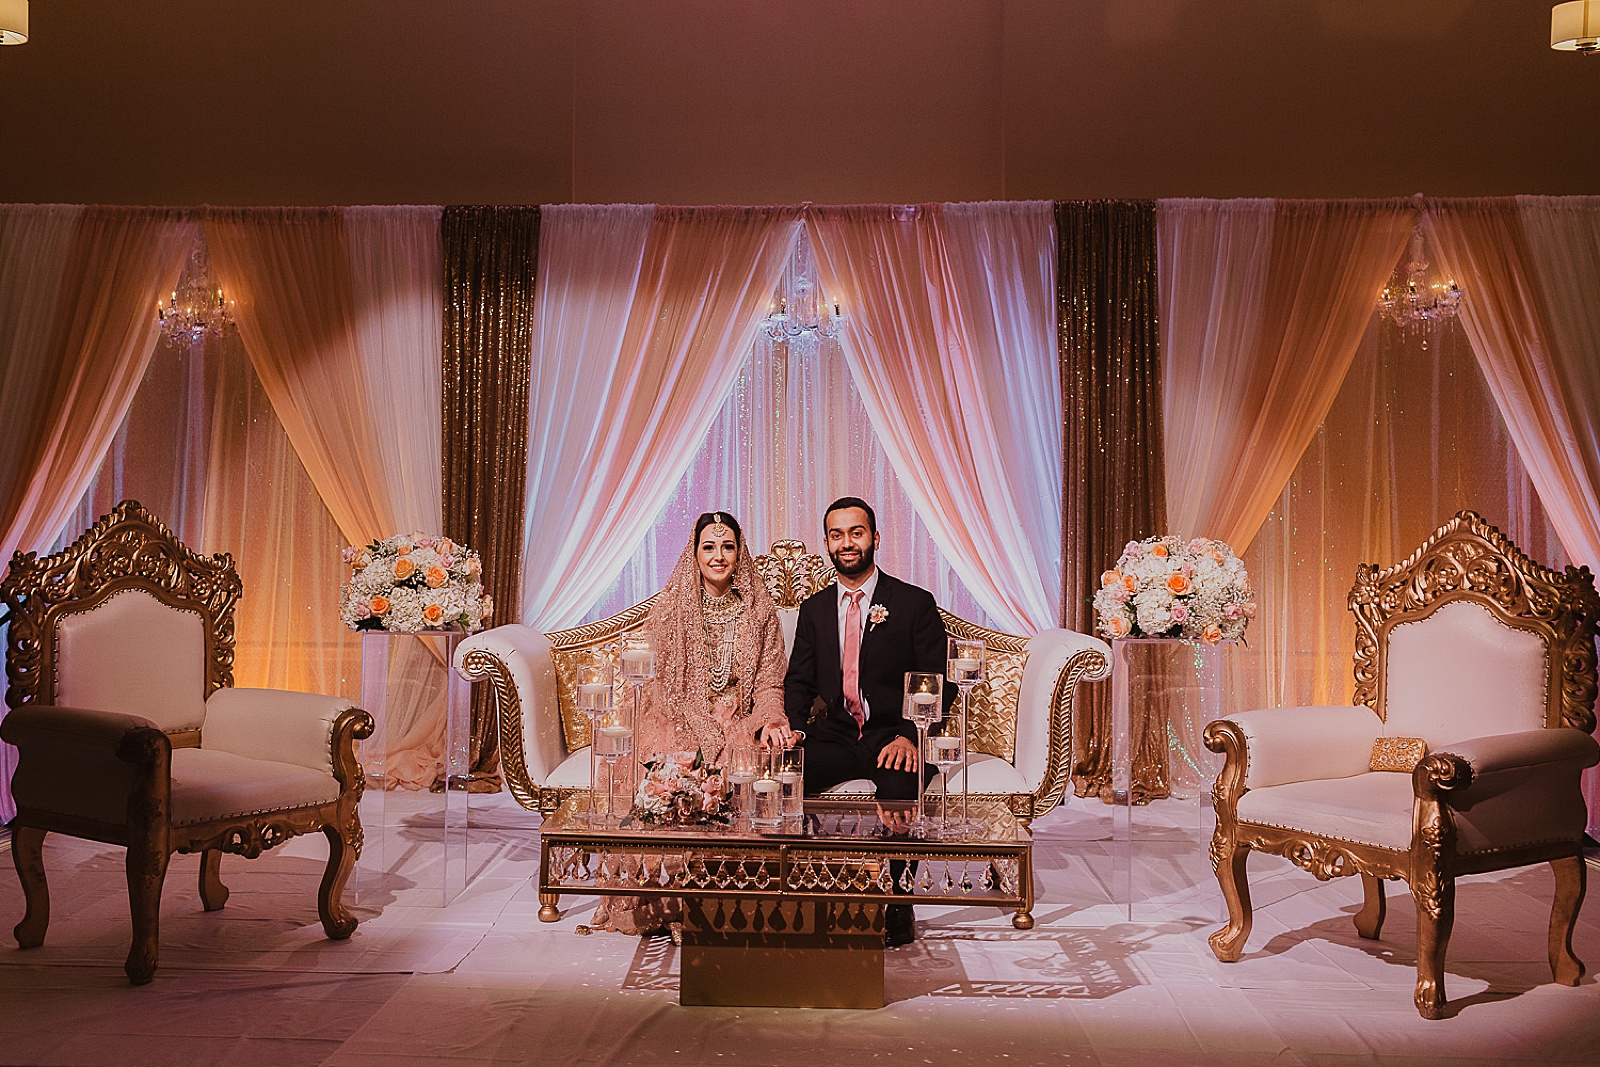 Non traditional Indian wedding in St Louis Missouri captured by Caitlyn Cloud Photography